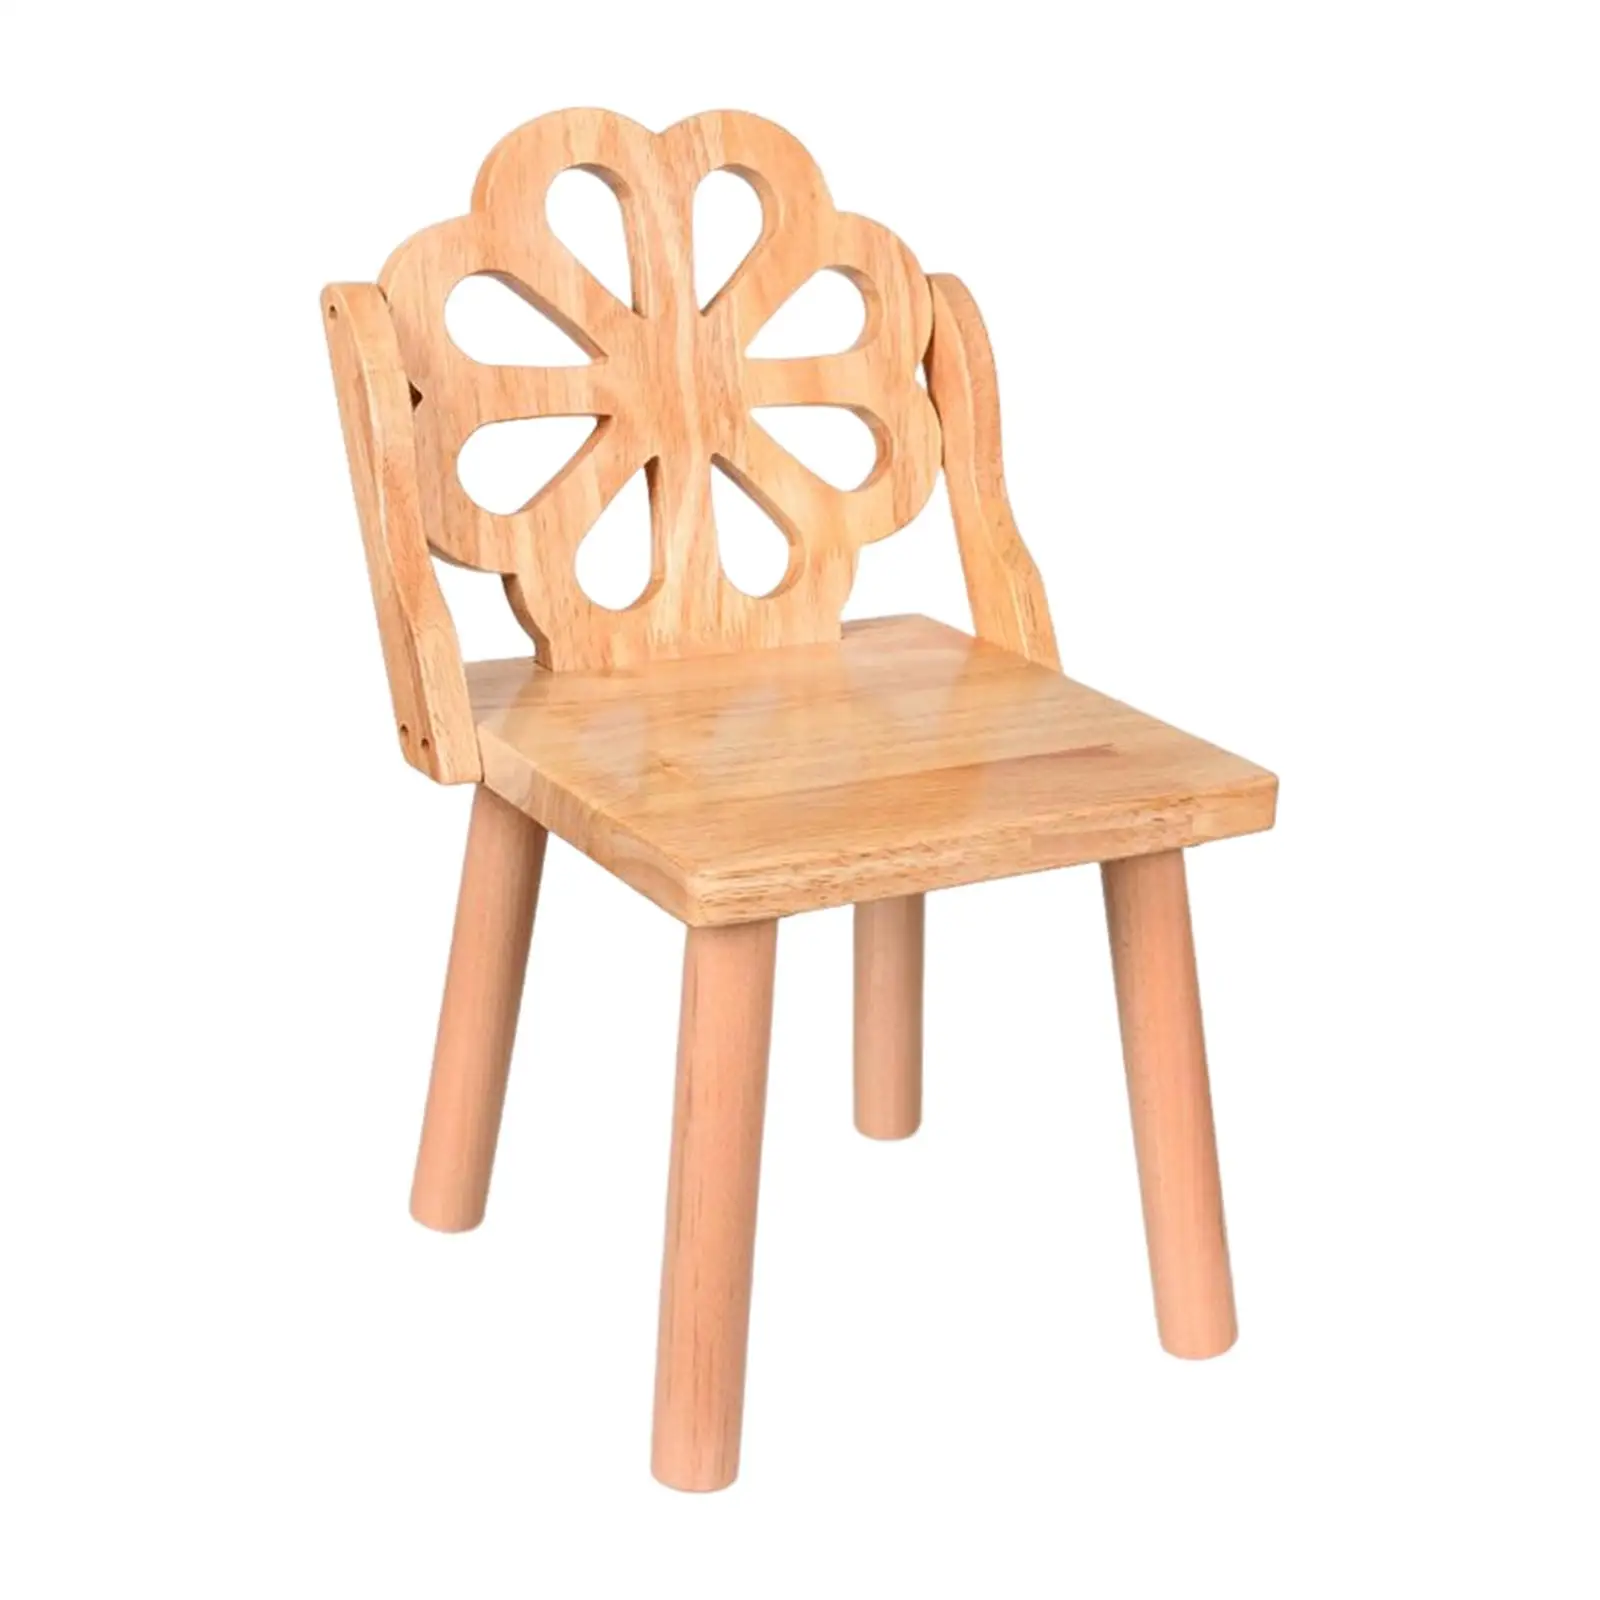 Household Removable Wooden Child Stool Anti Saving Durable Wooden